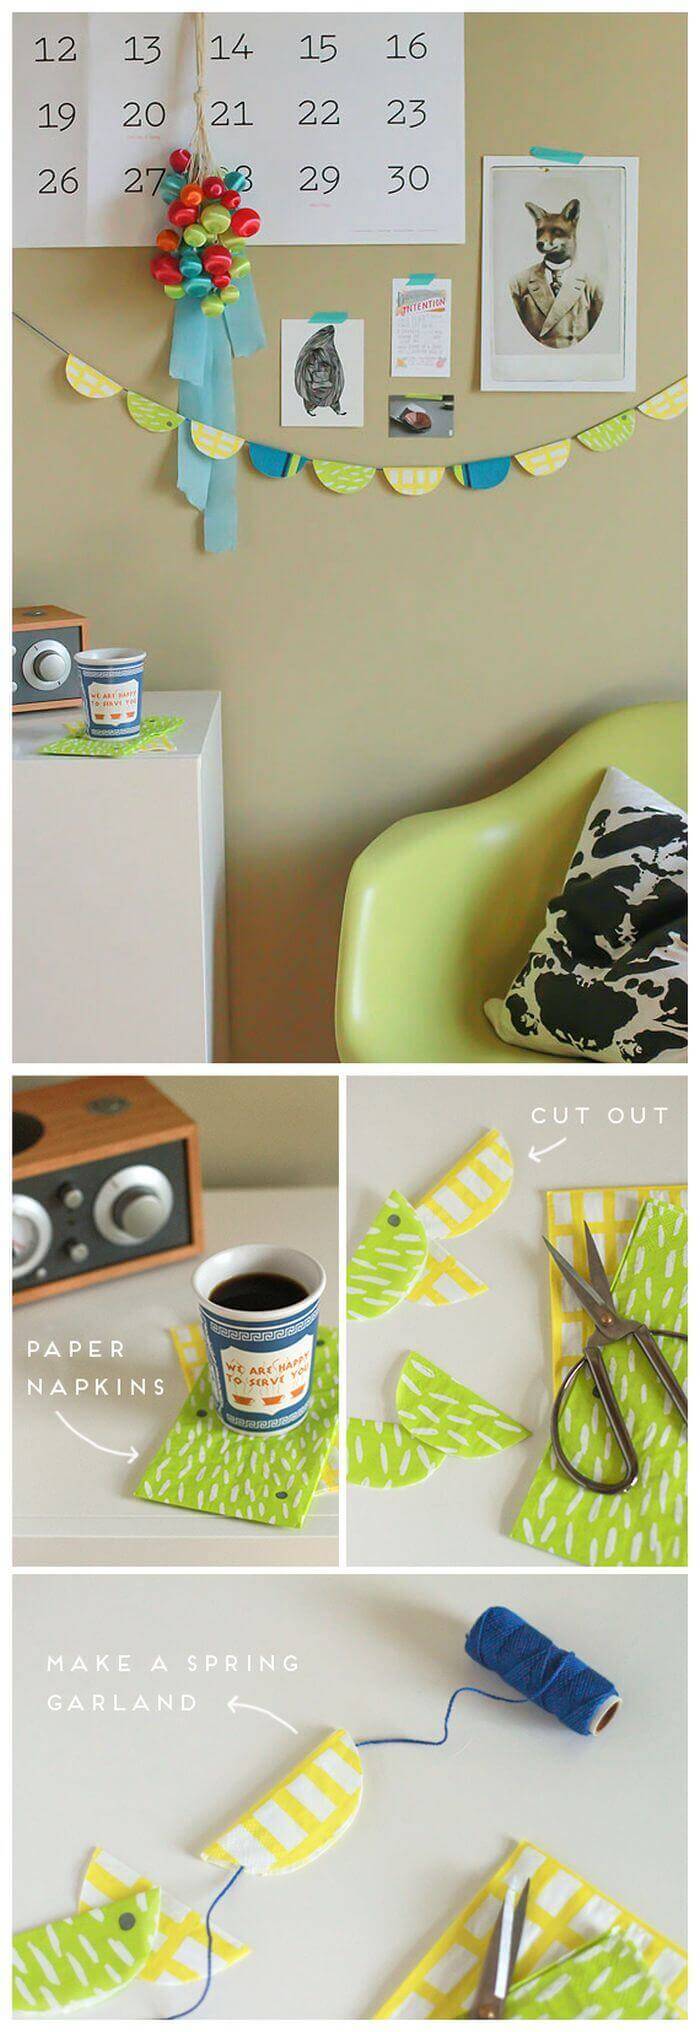 75 Best DIY Room Decor Ideas for Teens - DIY Projects for Teens